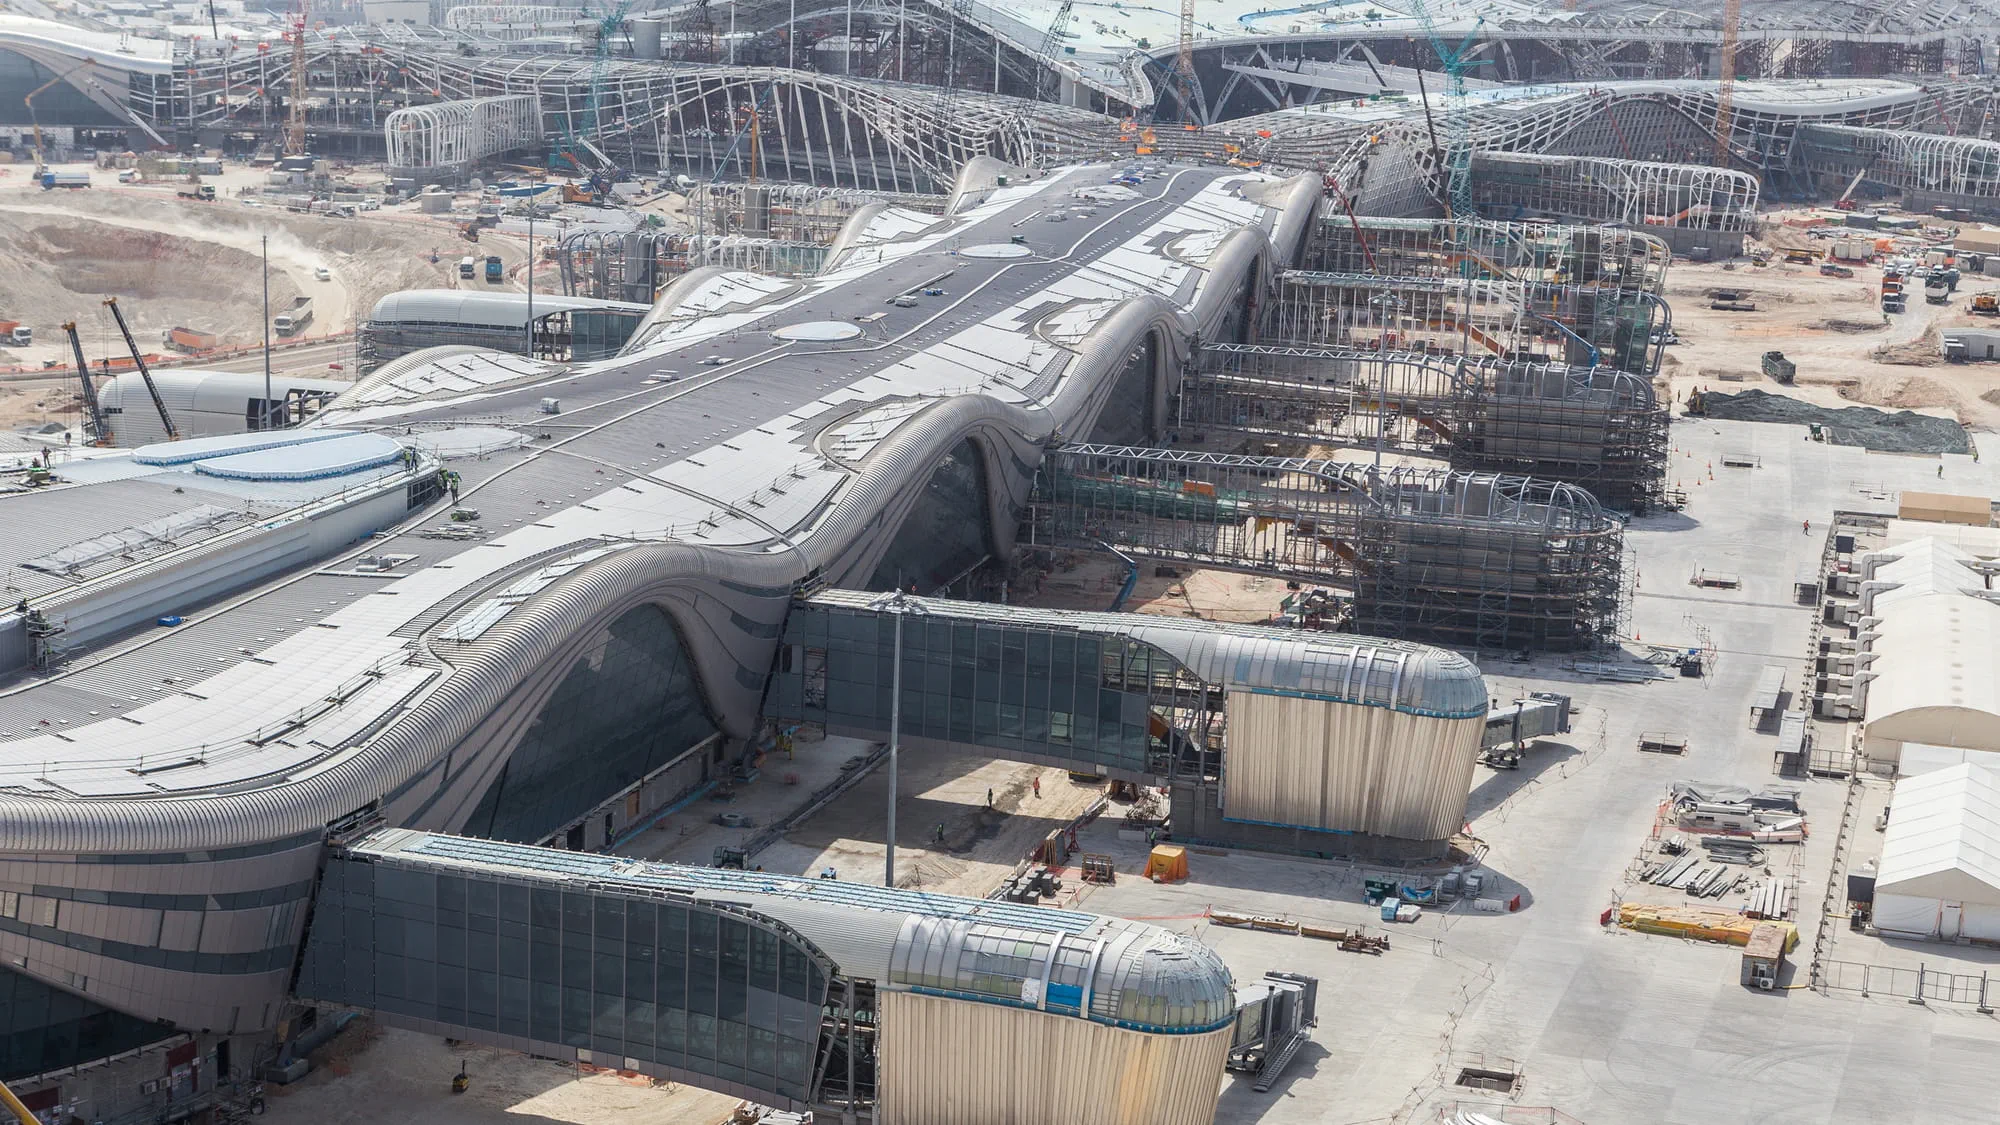 Aerial view of the airport during construction phase. Credit: ADAC.